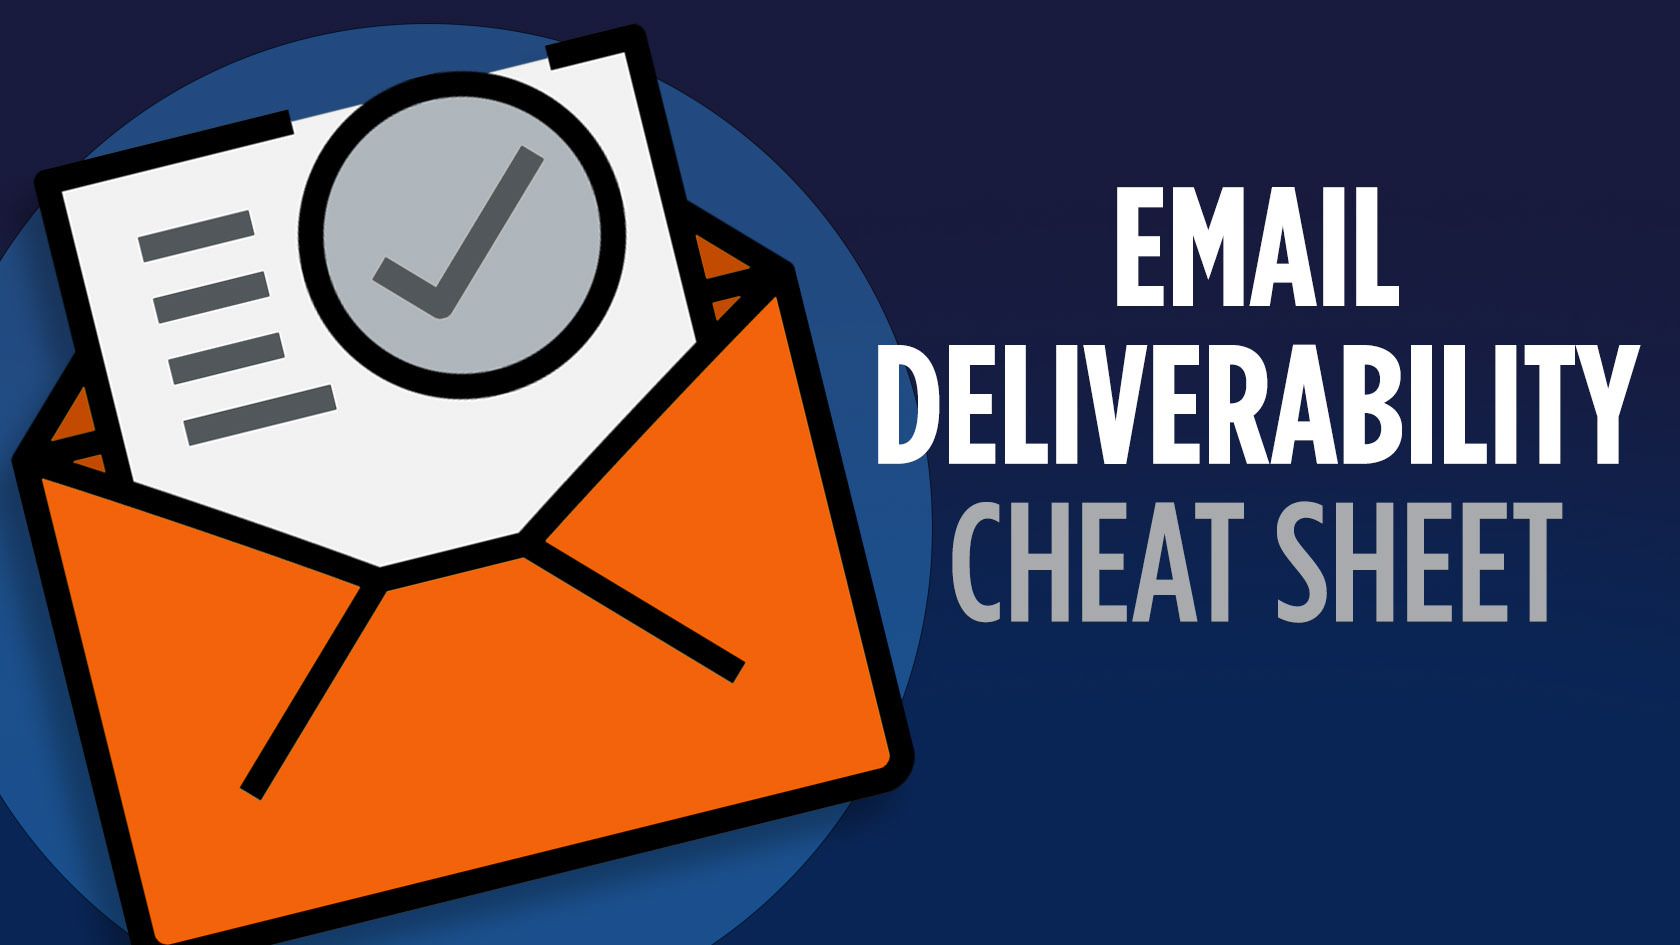 email deliverability terms